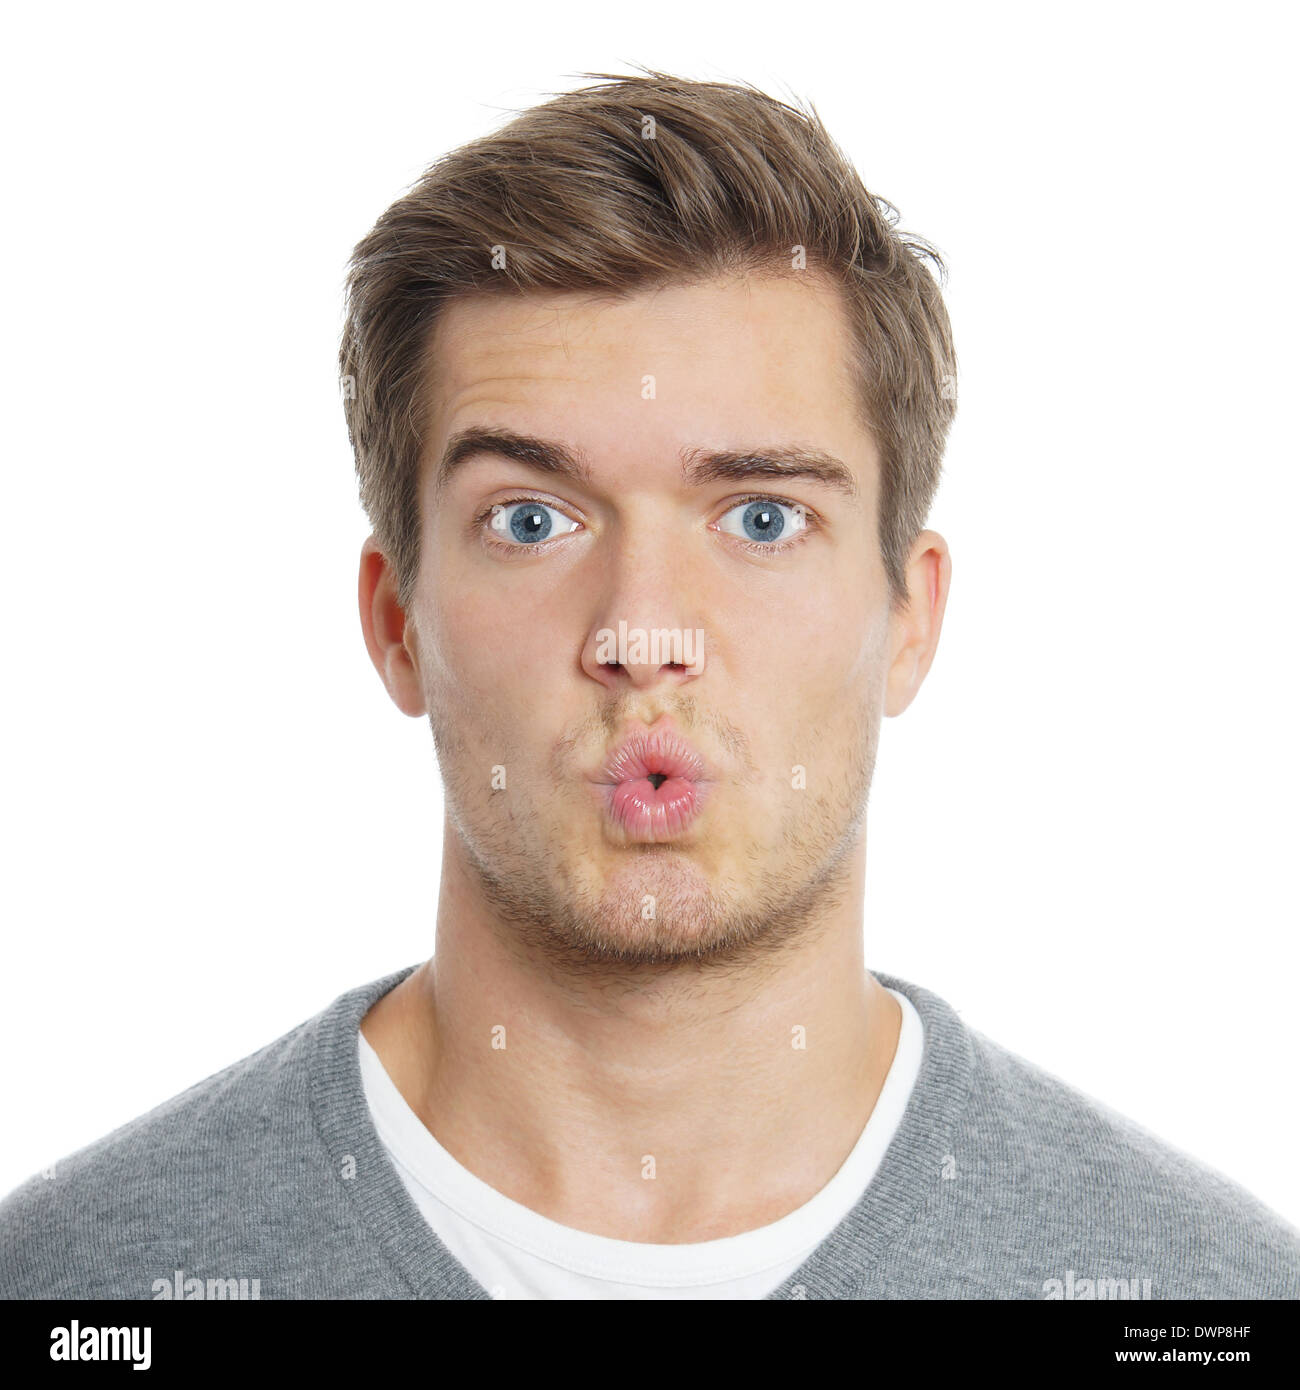 surpised young man with funny facial expression Stock Photo